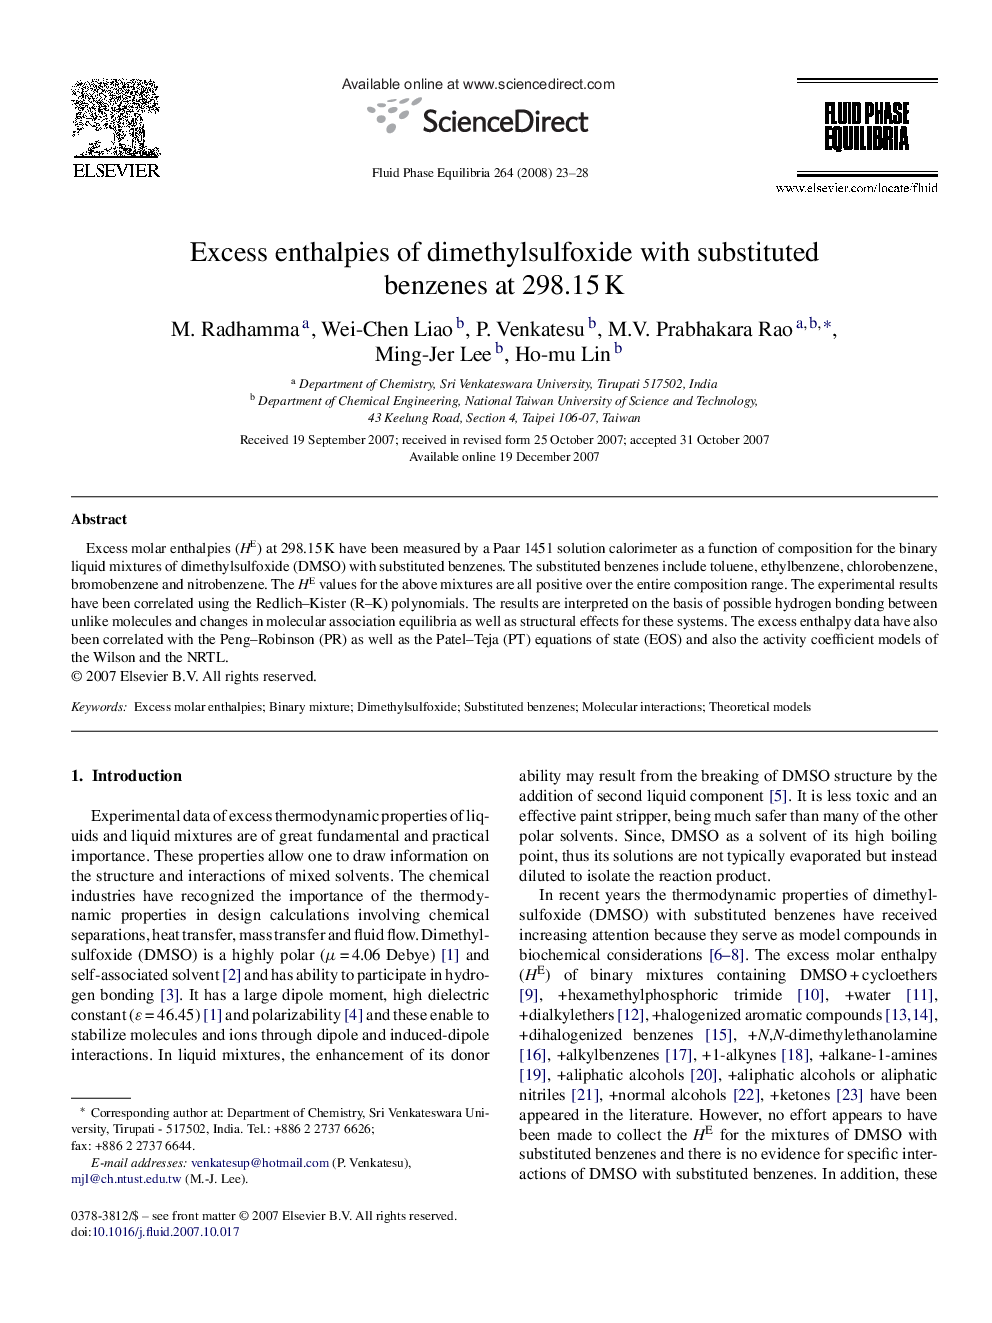 Excess enthalpies of dimethylsulfoxide with substituted benzenes at 298.15 K